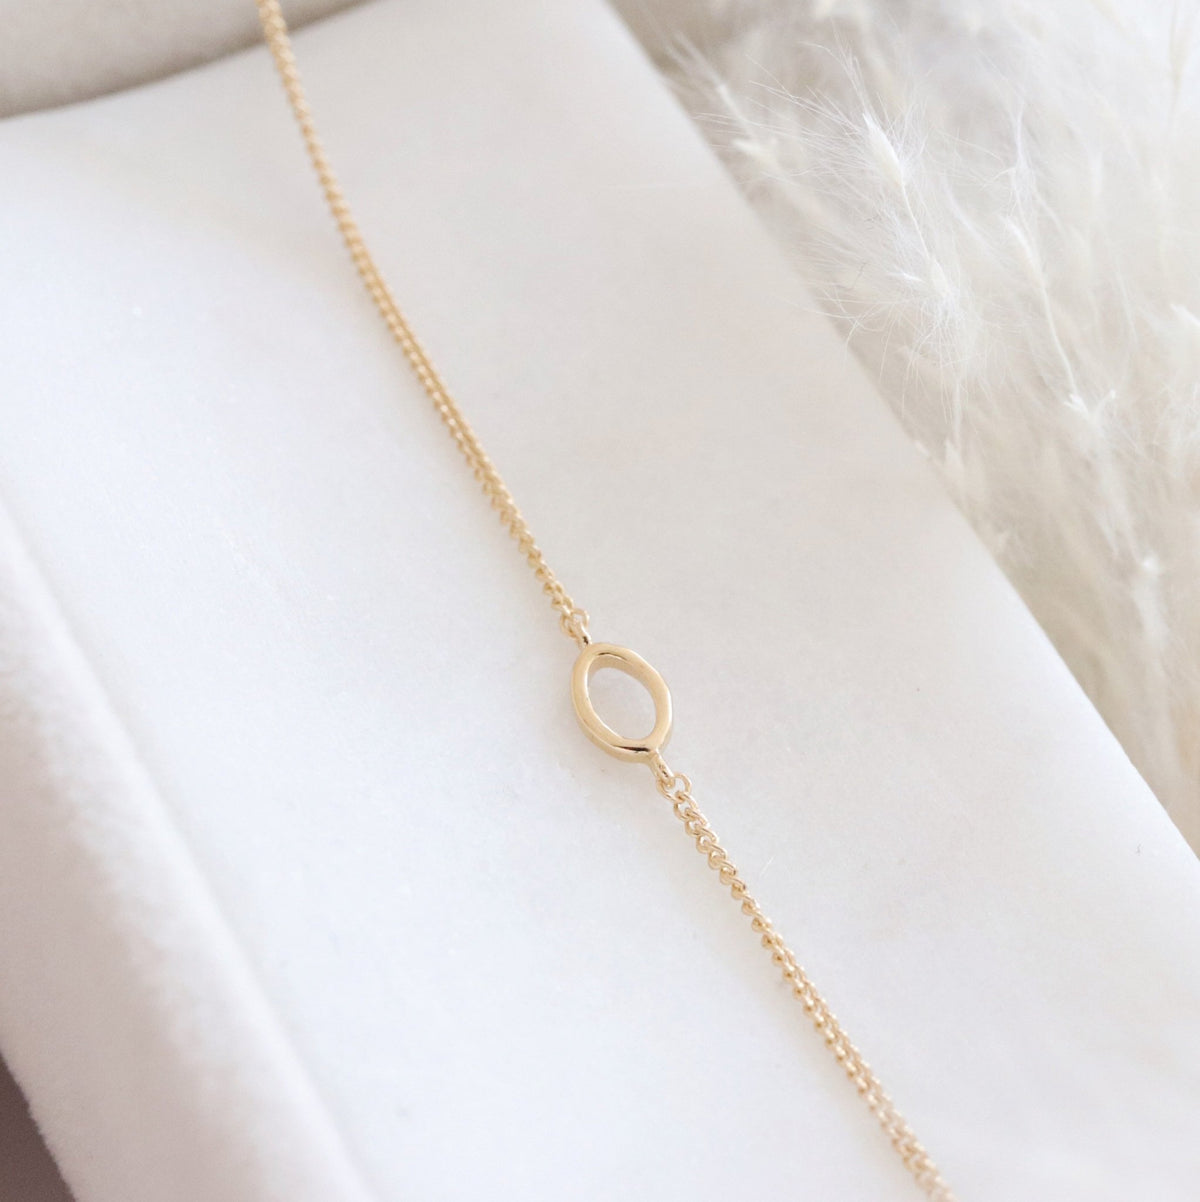 NOTABLE OFFSET INITIAL NECKLACE - O - GOLD - SO PRETTY CARA COTTER